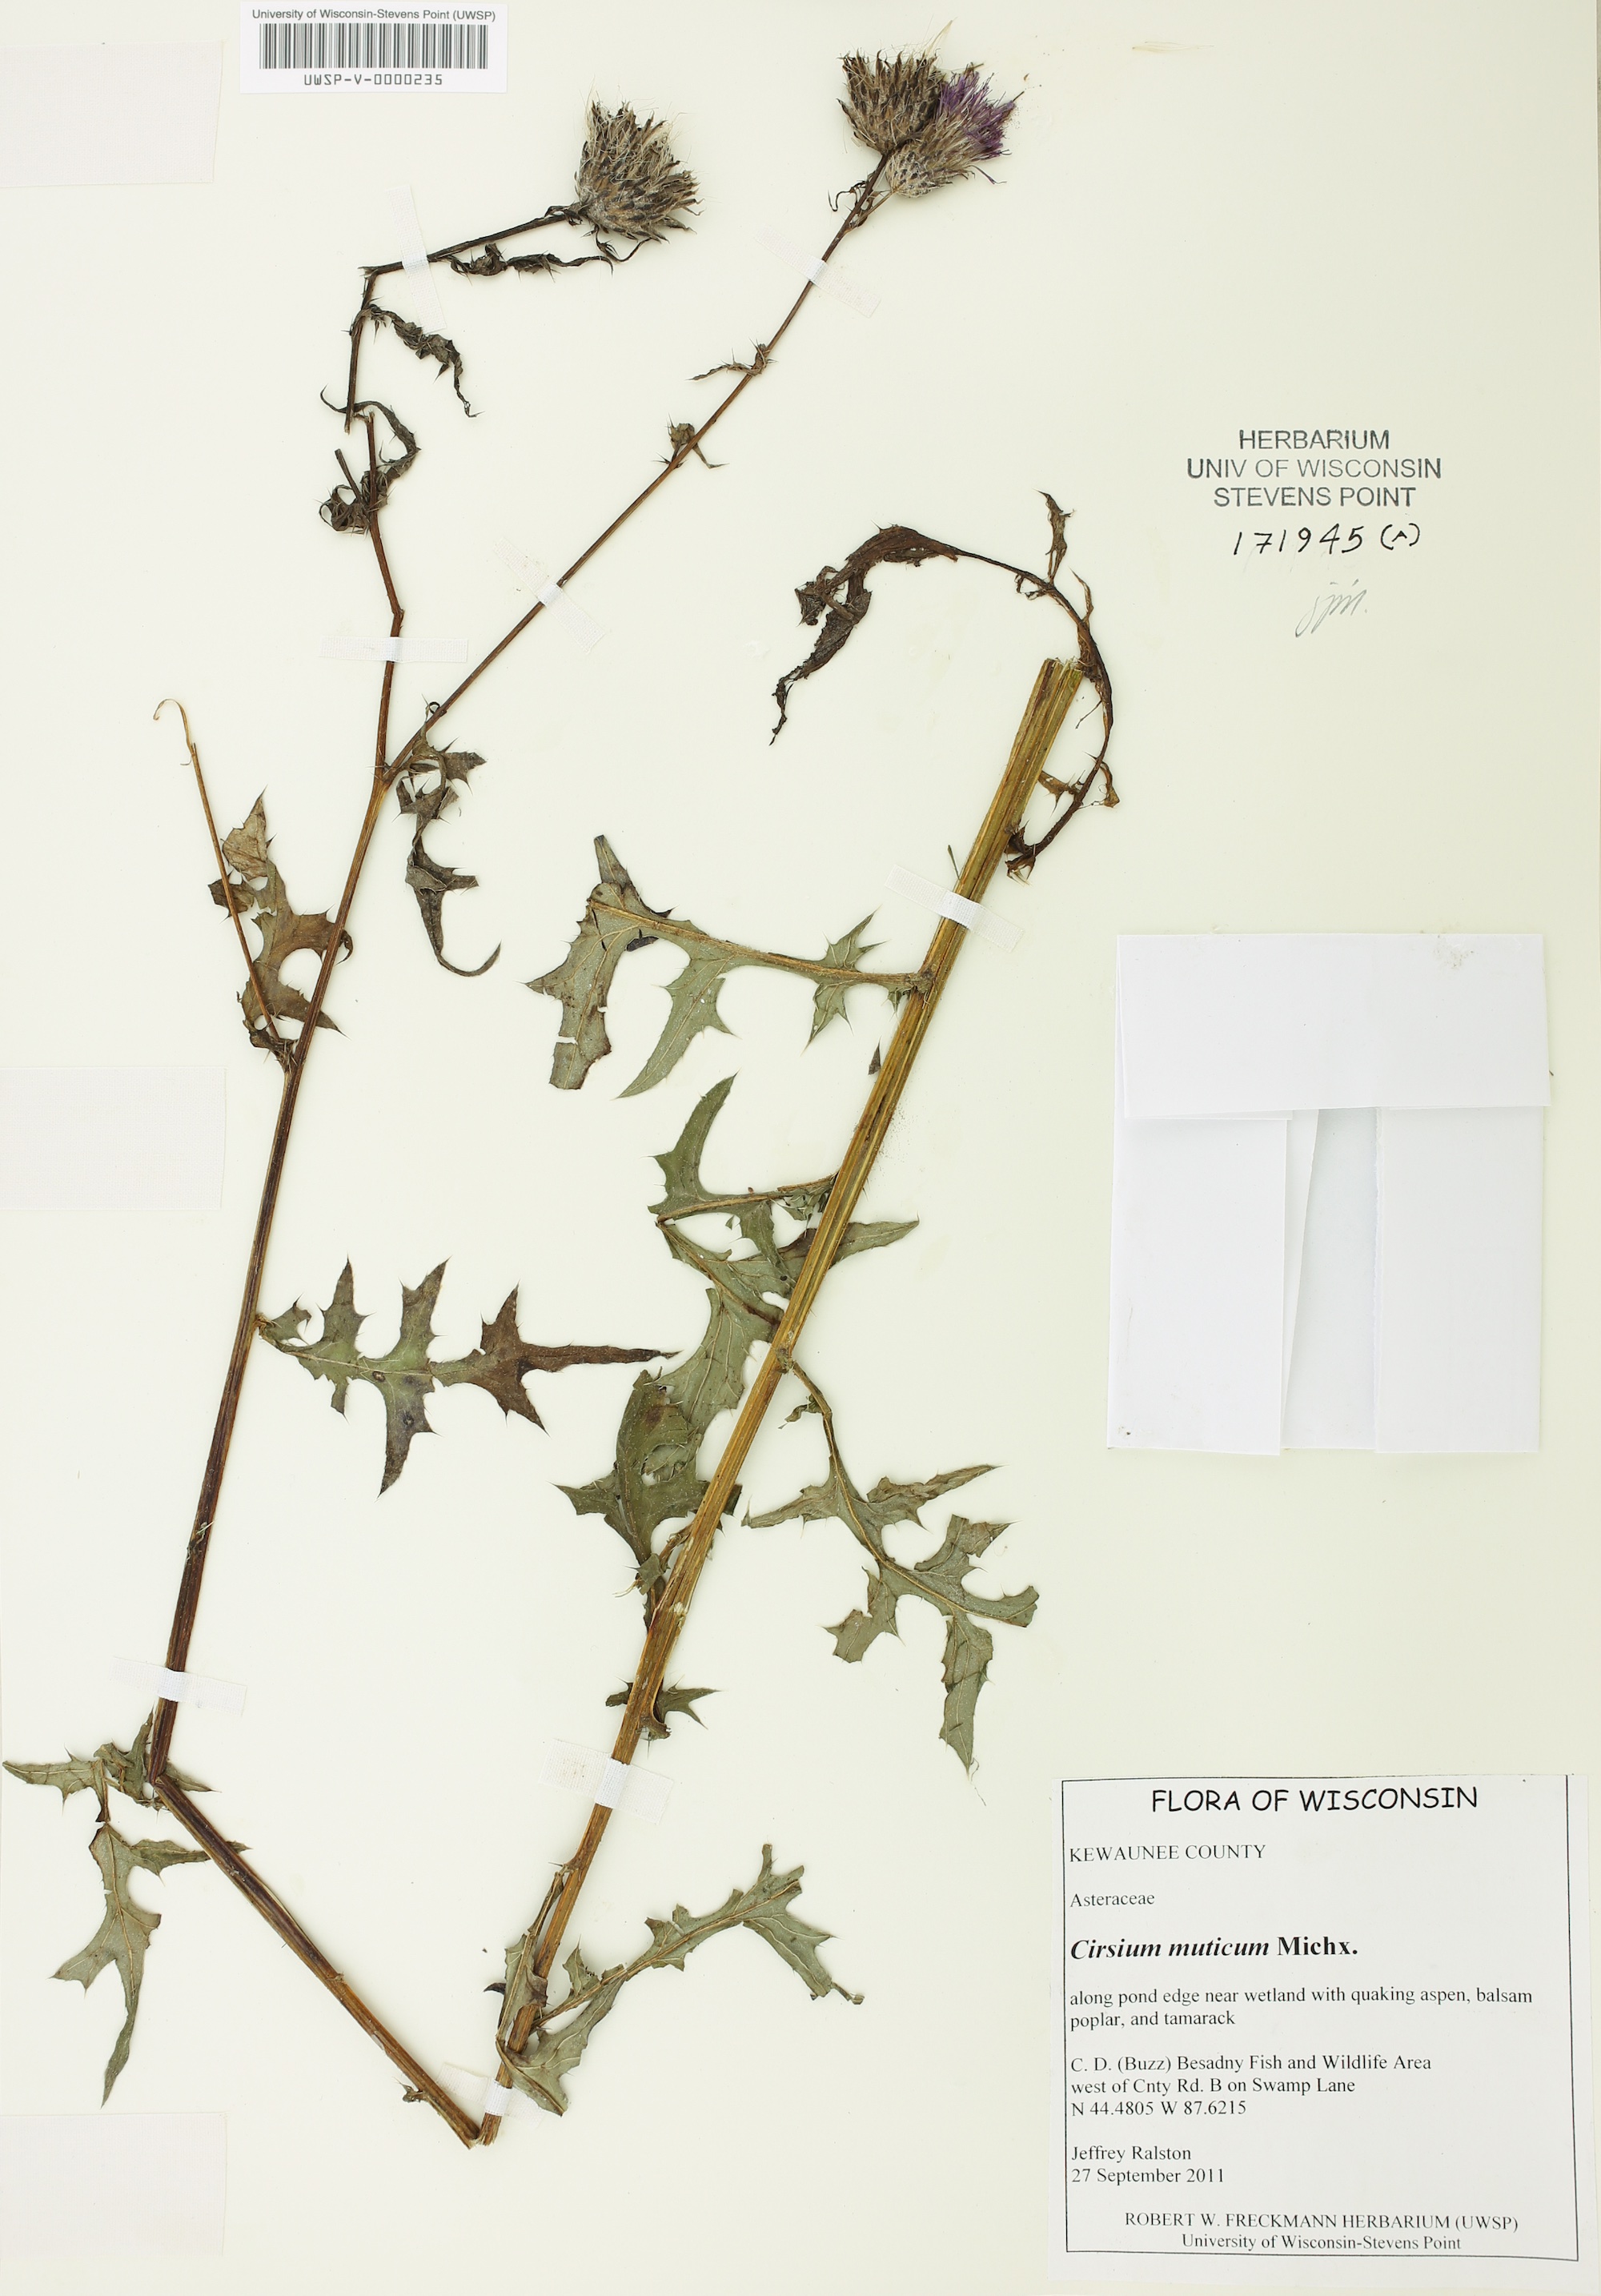 Swamp Thistle (Cirsium muticum) specimen collected in Kewaunee County, Wisconsin on September 27, 2011.